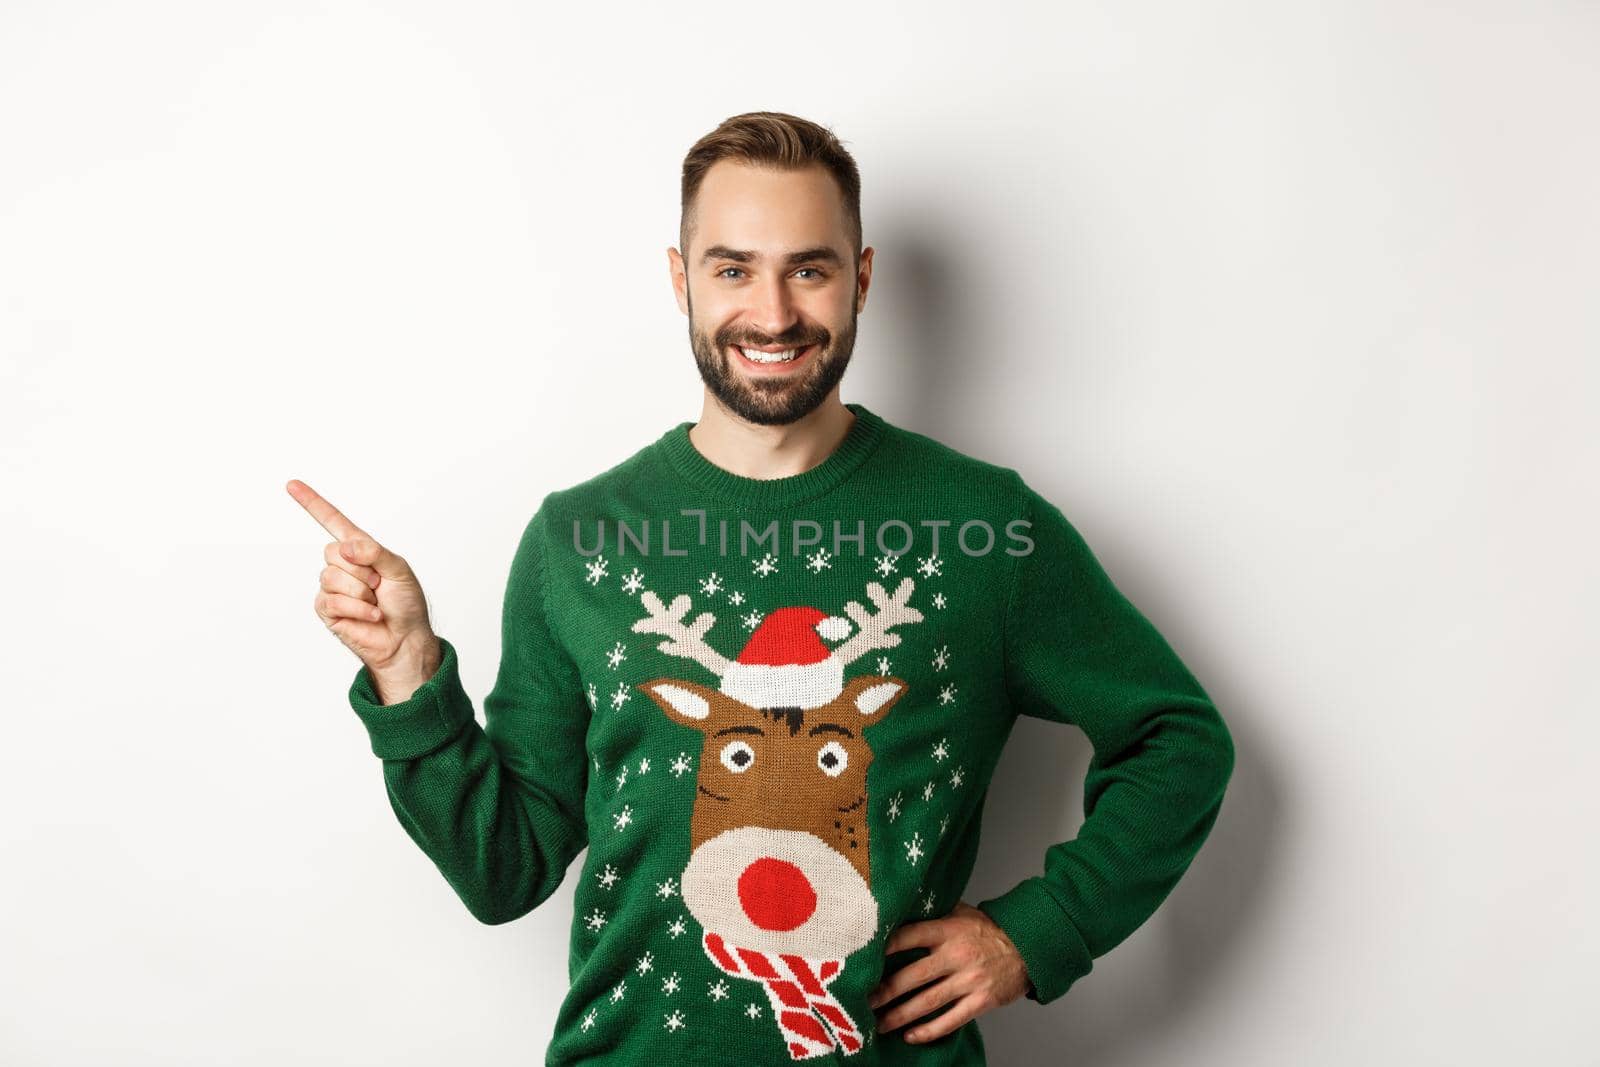 New year celebration and winter holidays concept. Confident and happy man with beard, wearing christmas sweater, pointing at upper left corner banner, white background.